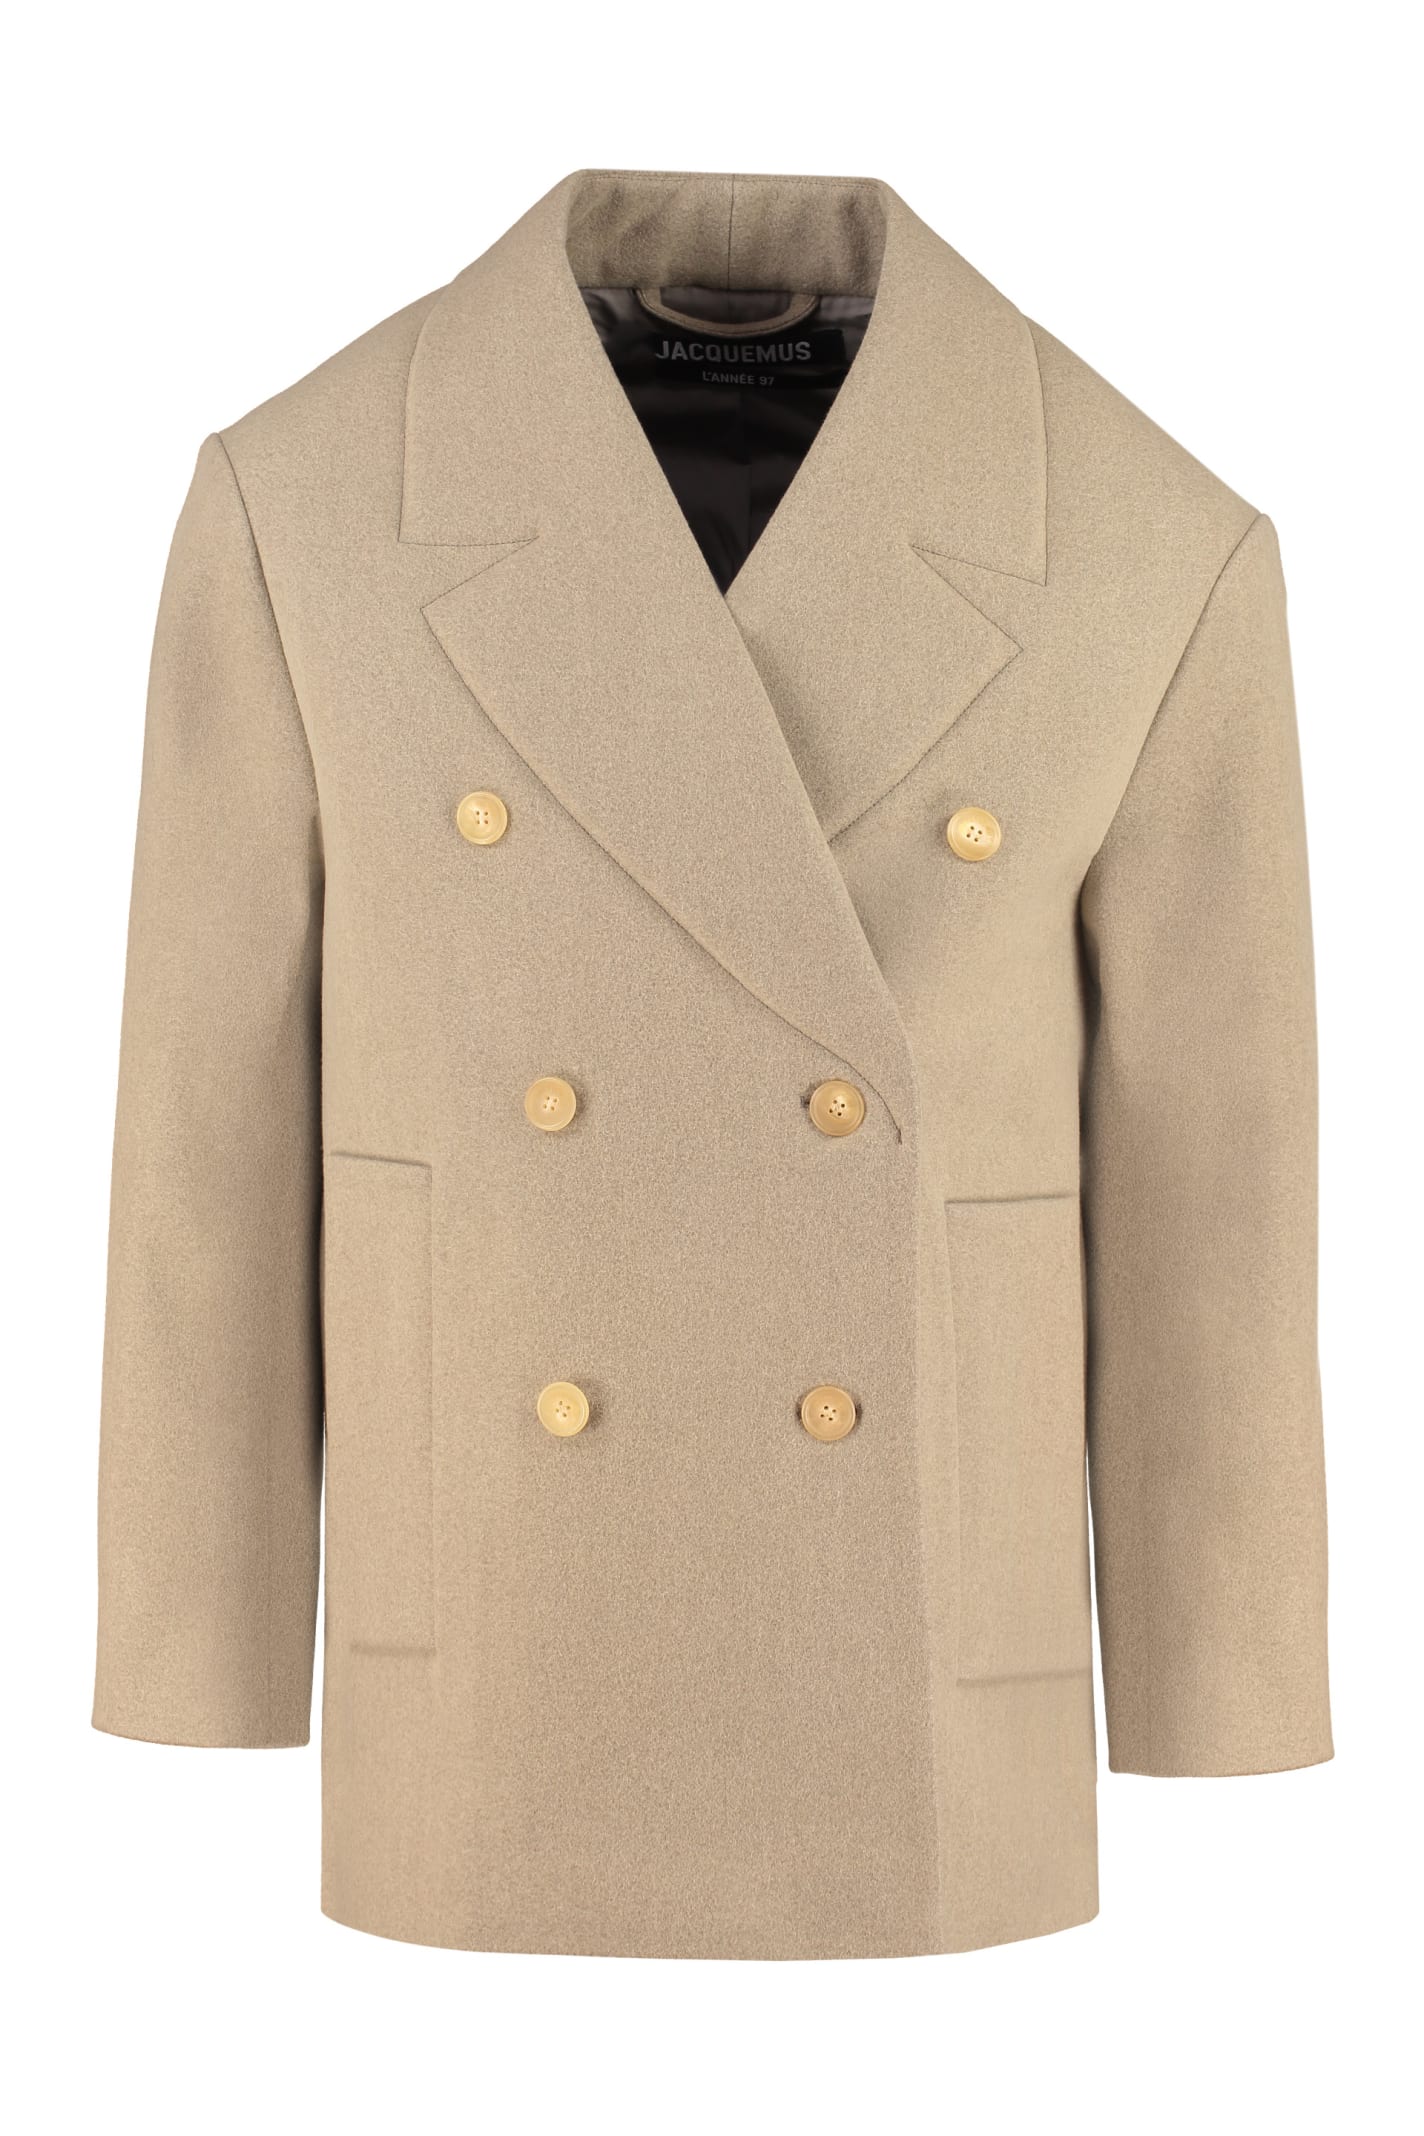 Jacquemus Le Caban Double-breasted Coat